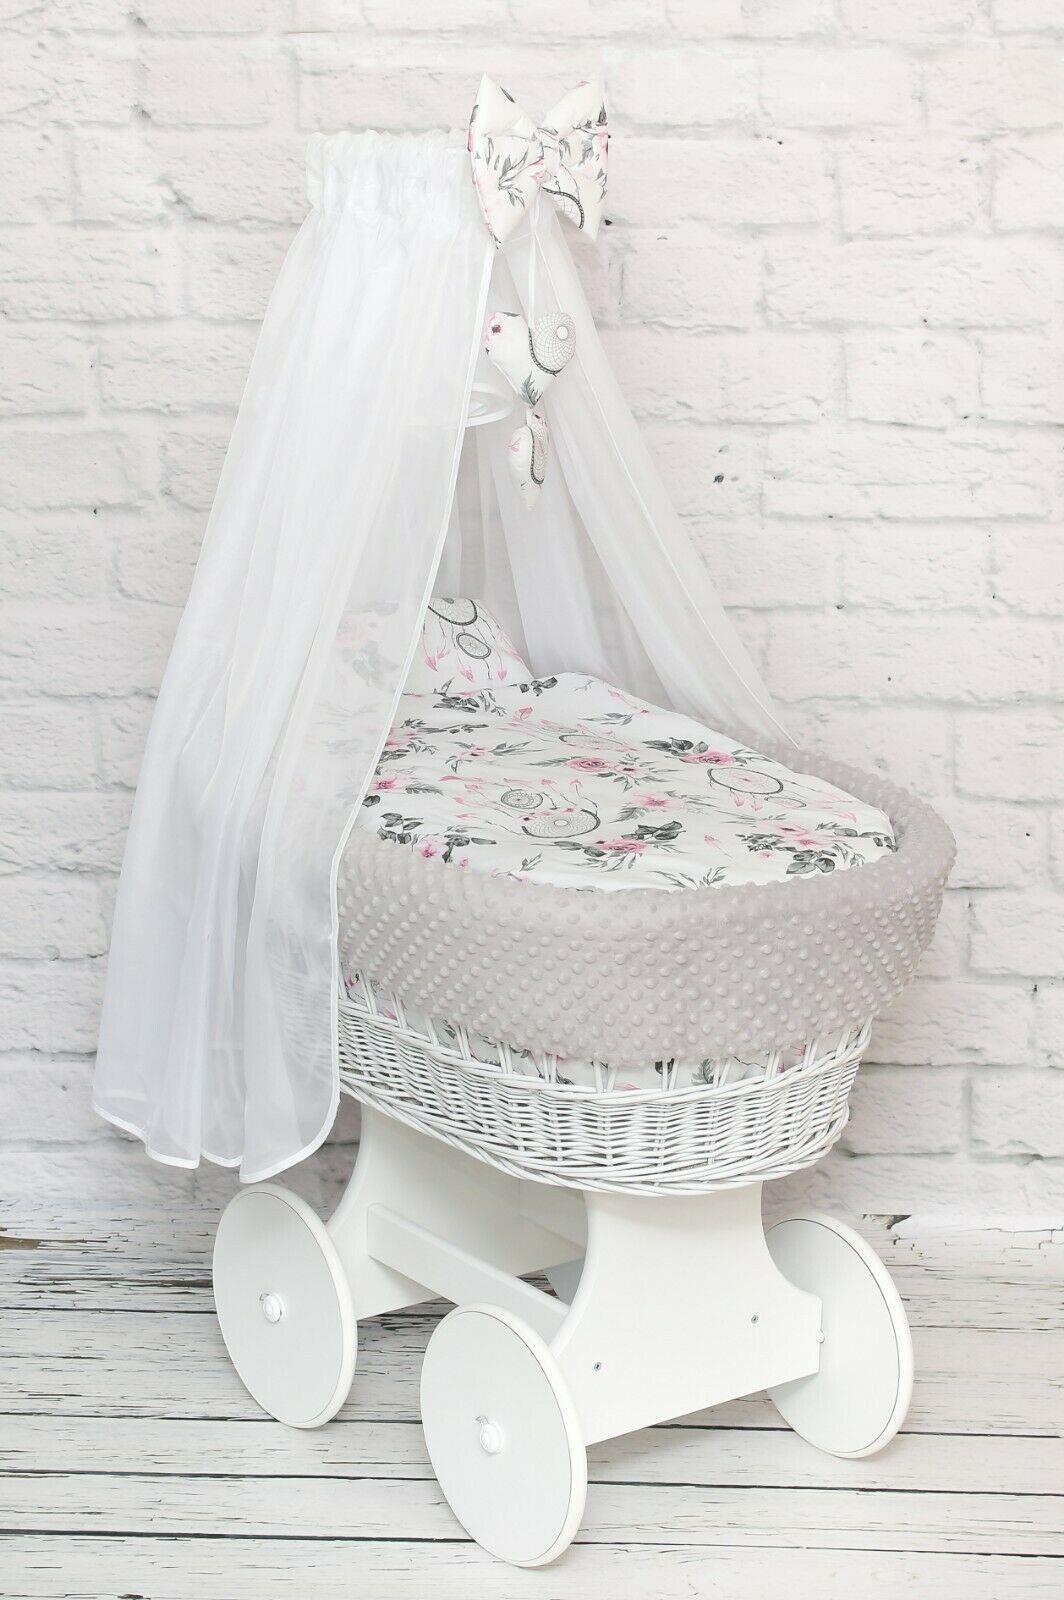 Full Bedding Set With Canopy To Fit Wicker Moses Basket Dream Catcher - Grey Dimple